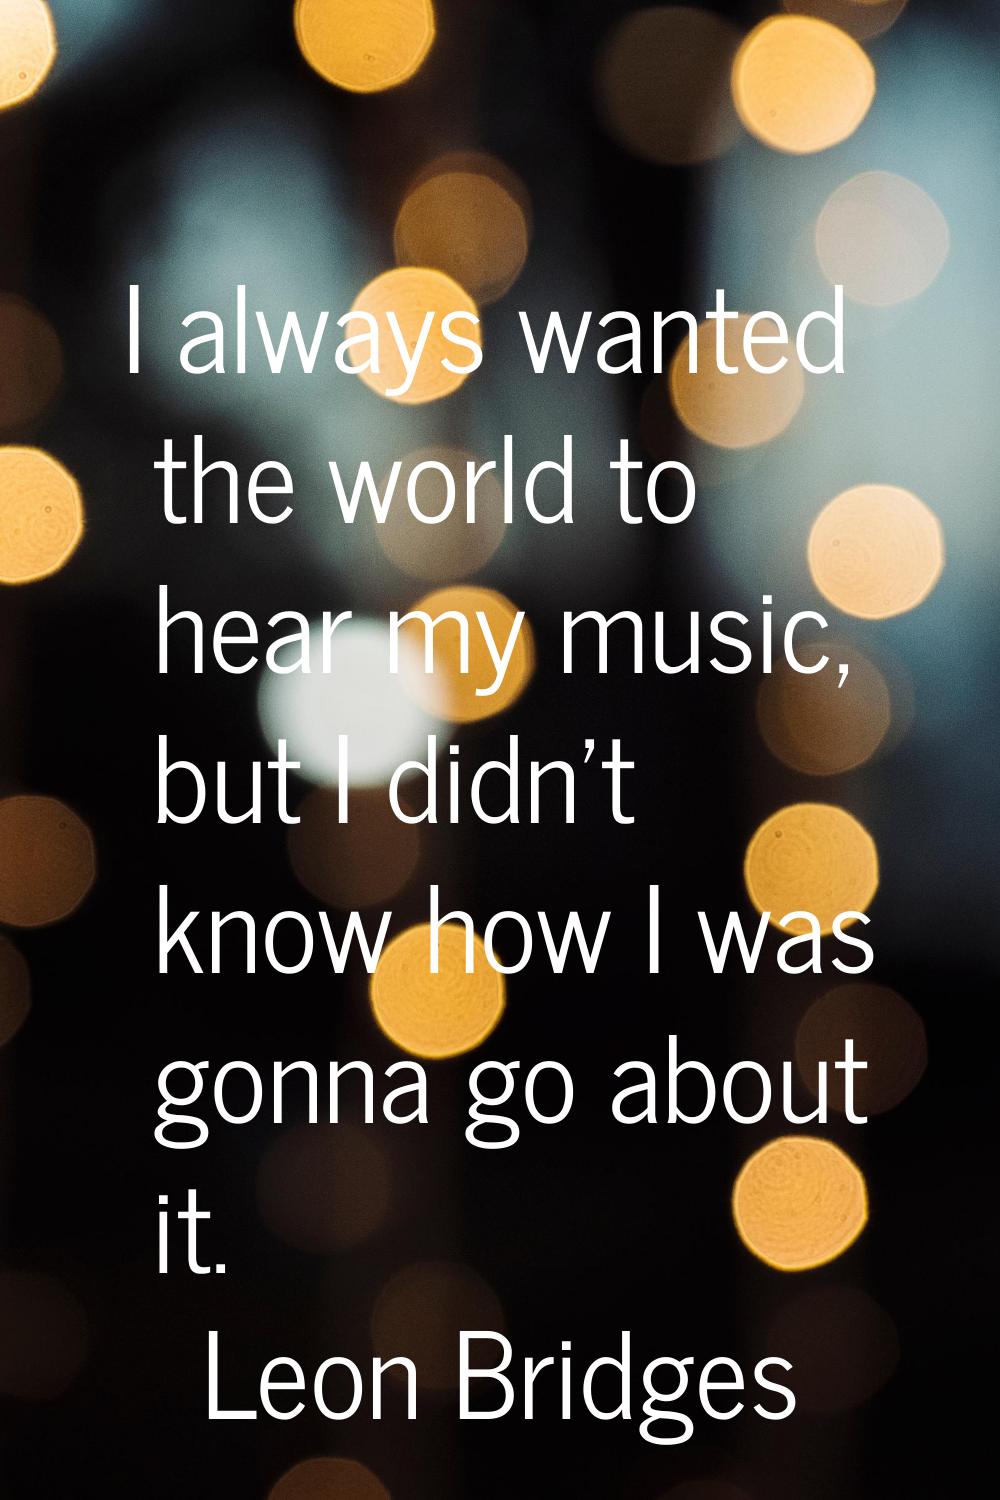 I always wanted the world to hear my music, but I didn't know how I was gonna go about it.